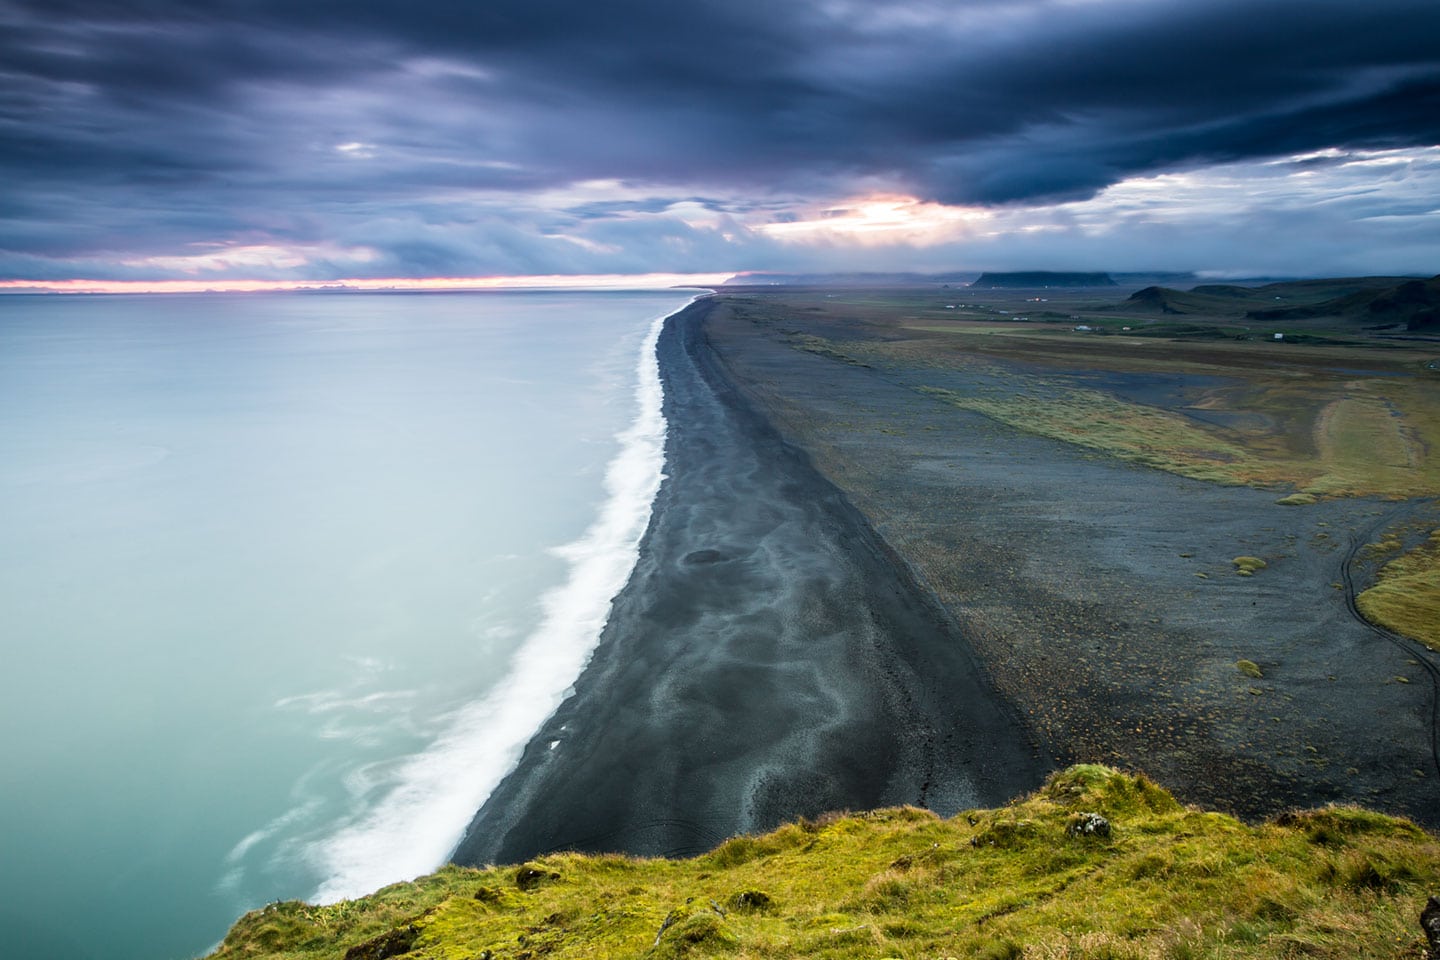 Travel photography of the coast in Iceland, taken from Dyrholaey